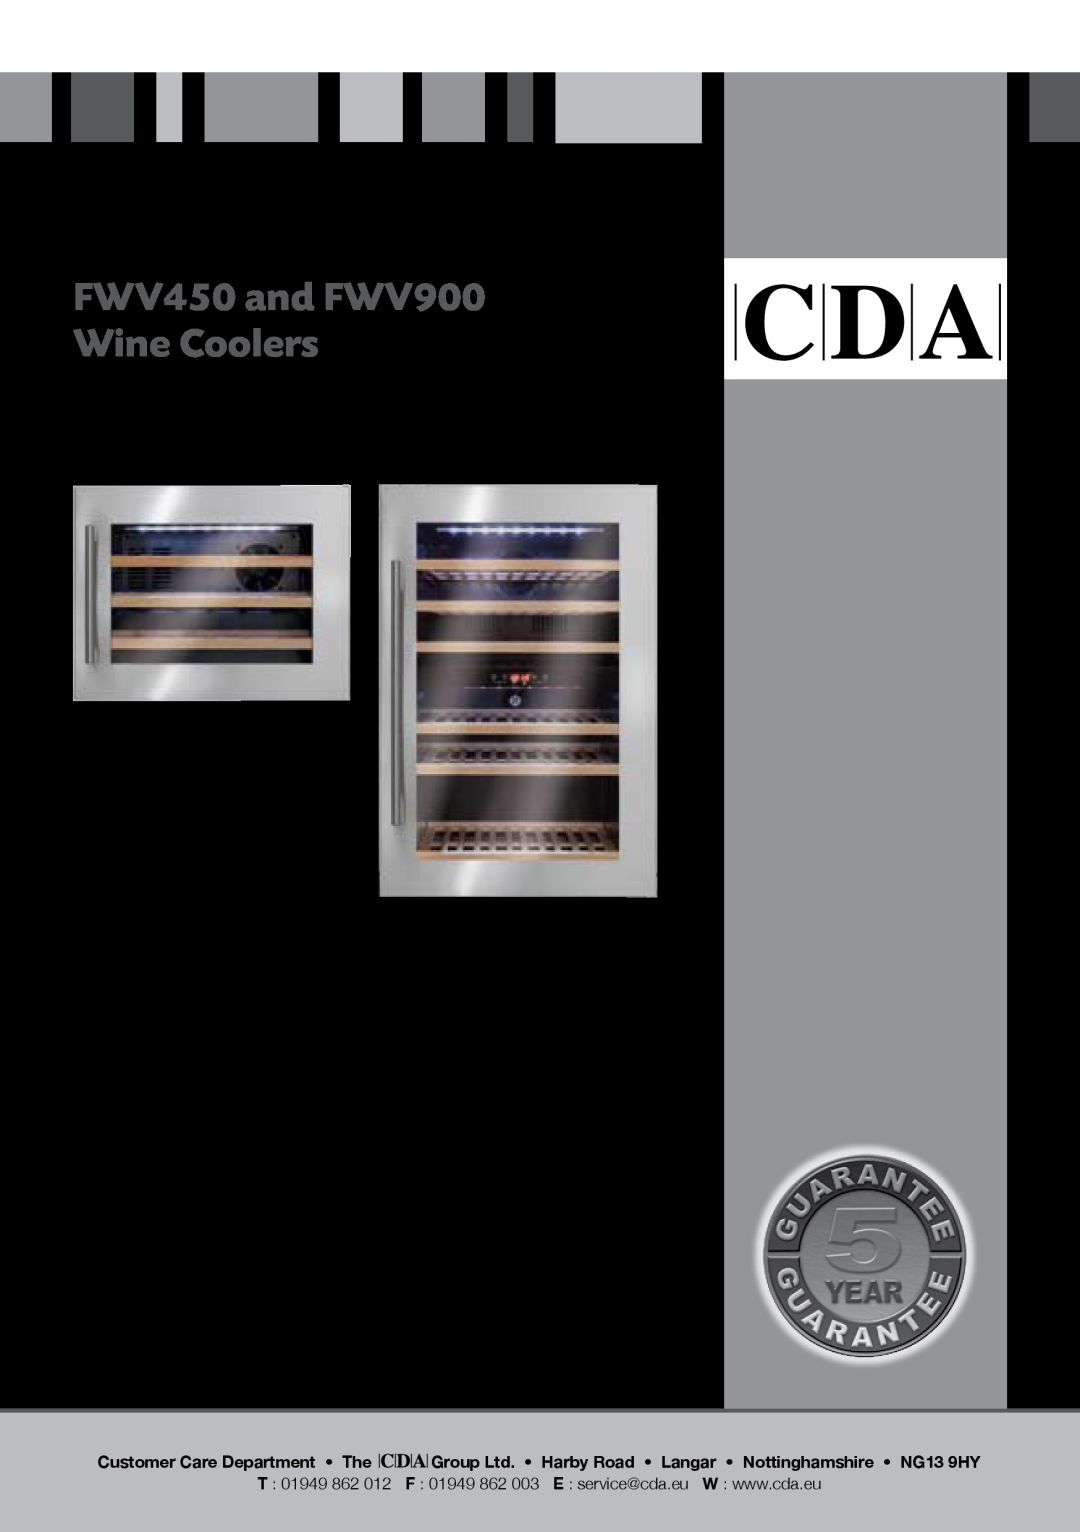 CDA manual FWV450 and FWV900 Wine Coolers, Manual for Installation, Use and Maintenance, Customer Care Department The 